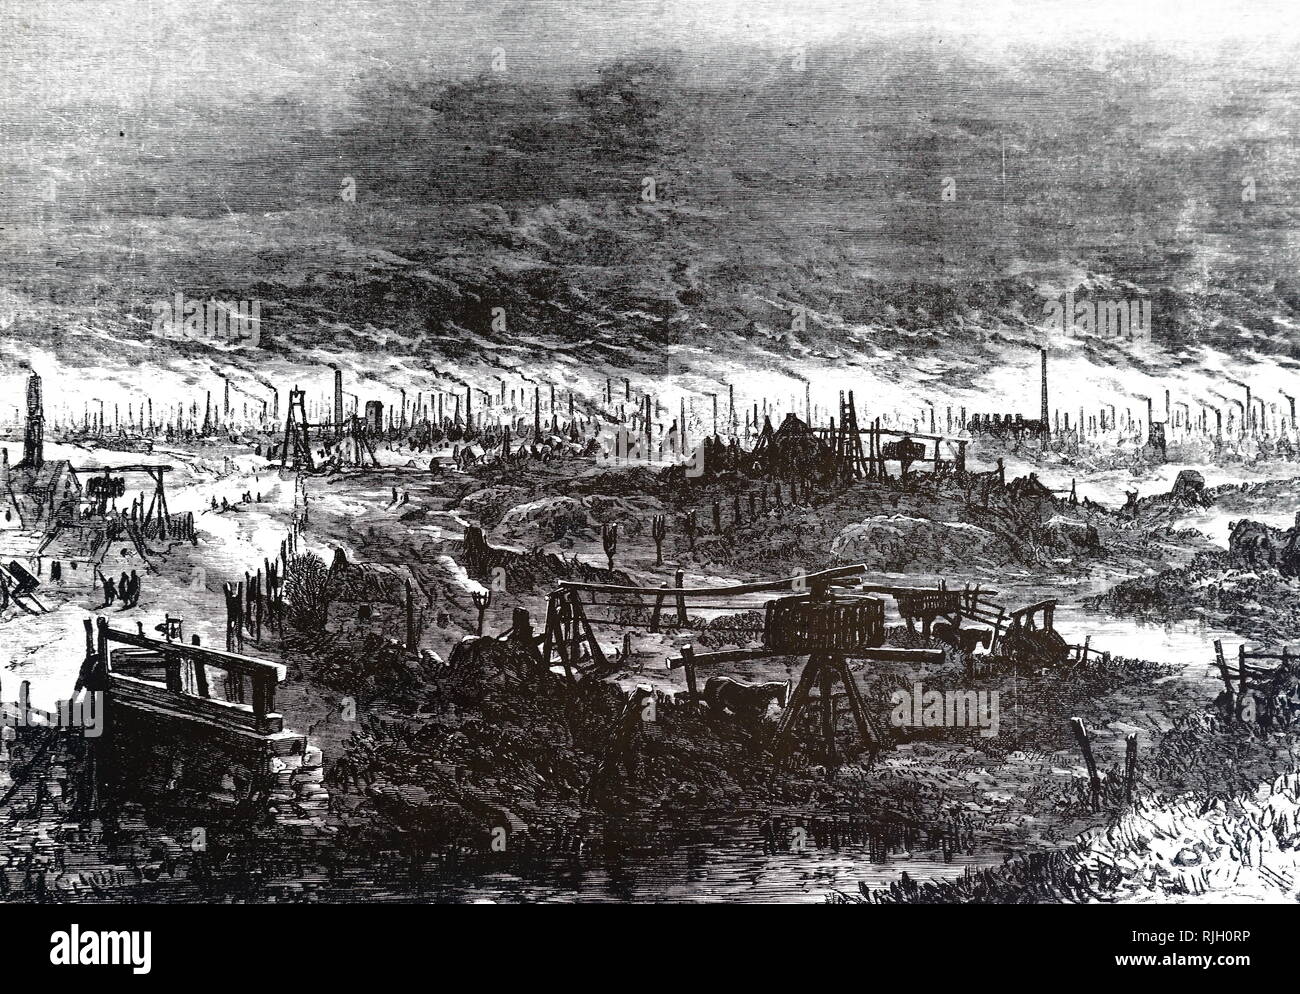 An engraving depicting a view of the 'Black Country' around Wolverhampton. The Black Country is an area of the West Midlands, England. During the Industrial Revolution, it became one of the most industrialised parts of Britain with coal mines, coking, iron foundries, glass factories, brickworks and steel mills producing a high level of air pollution. Dated 19th century Stock Photo